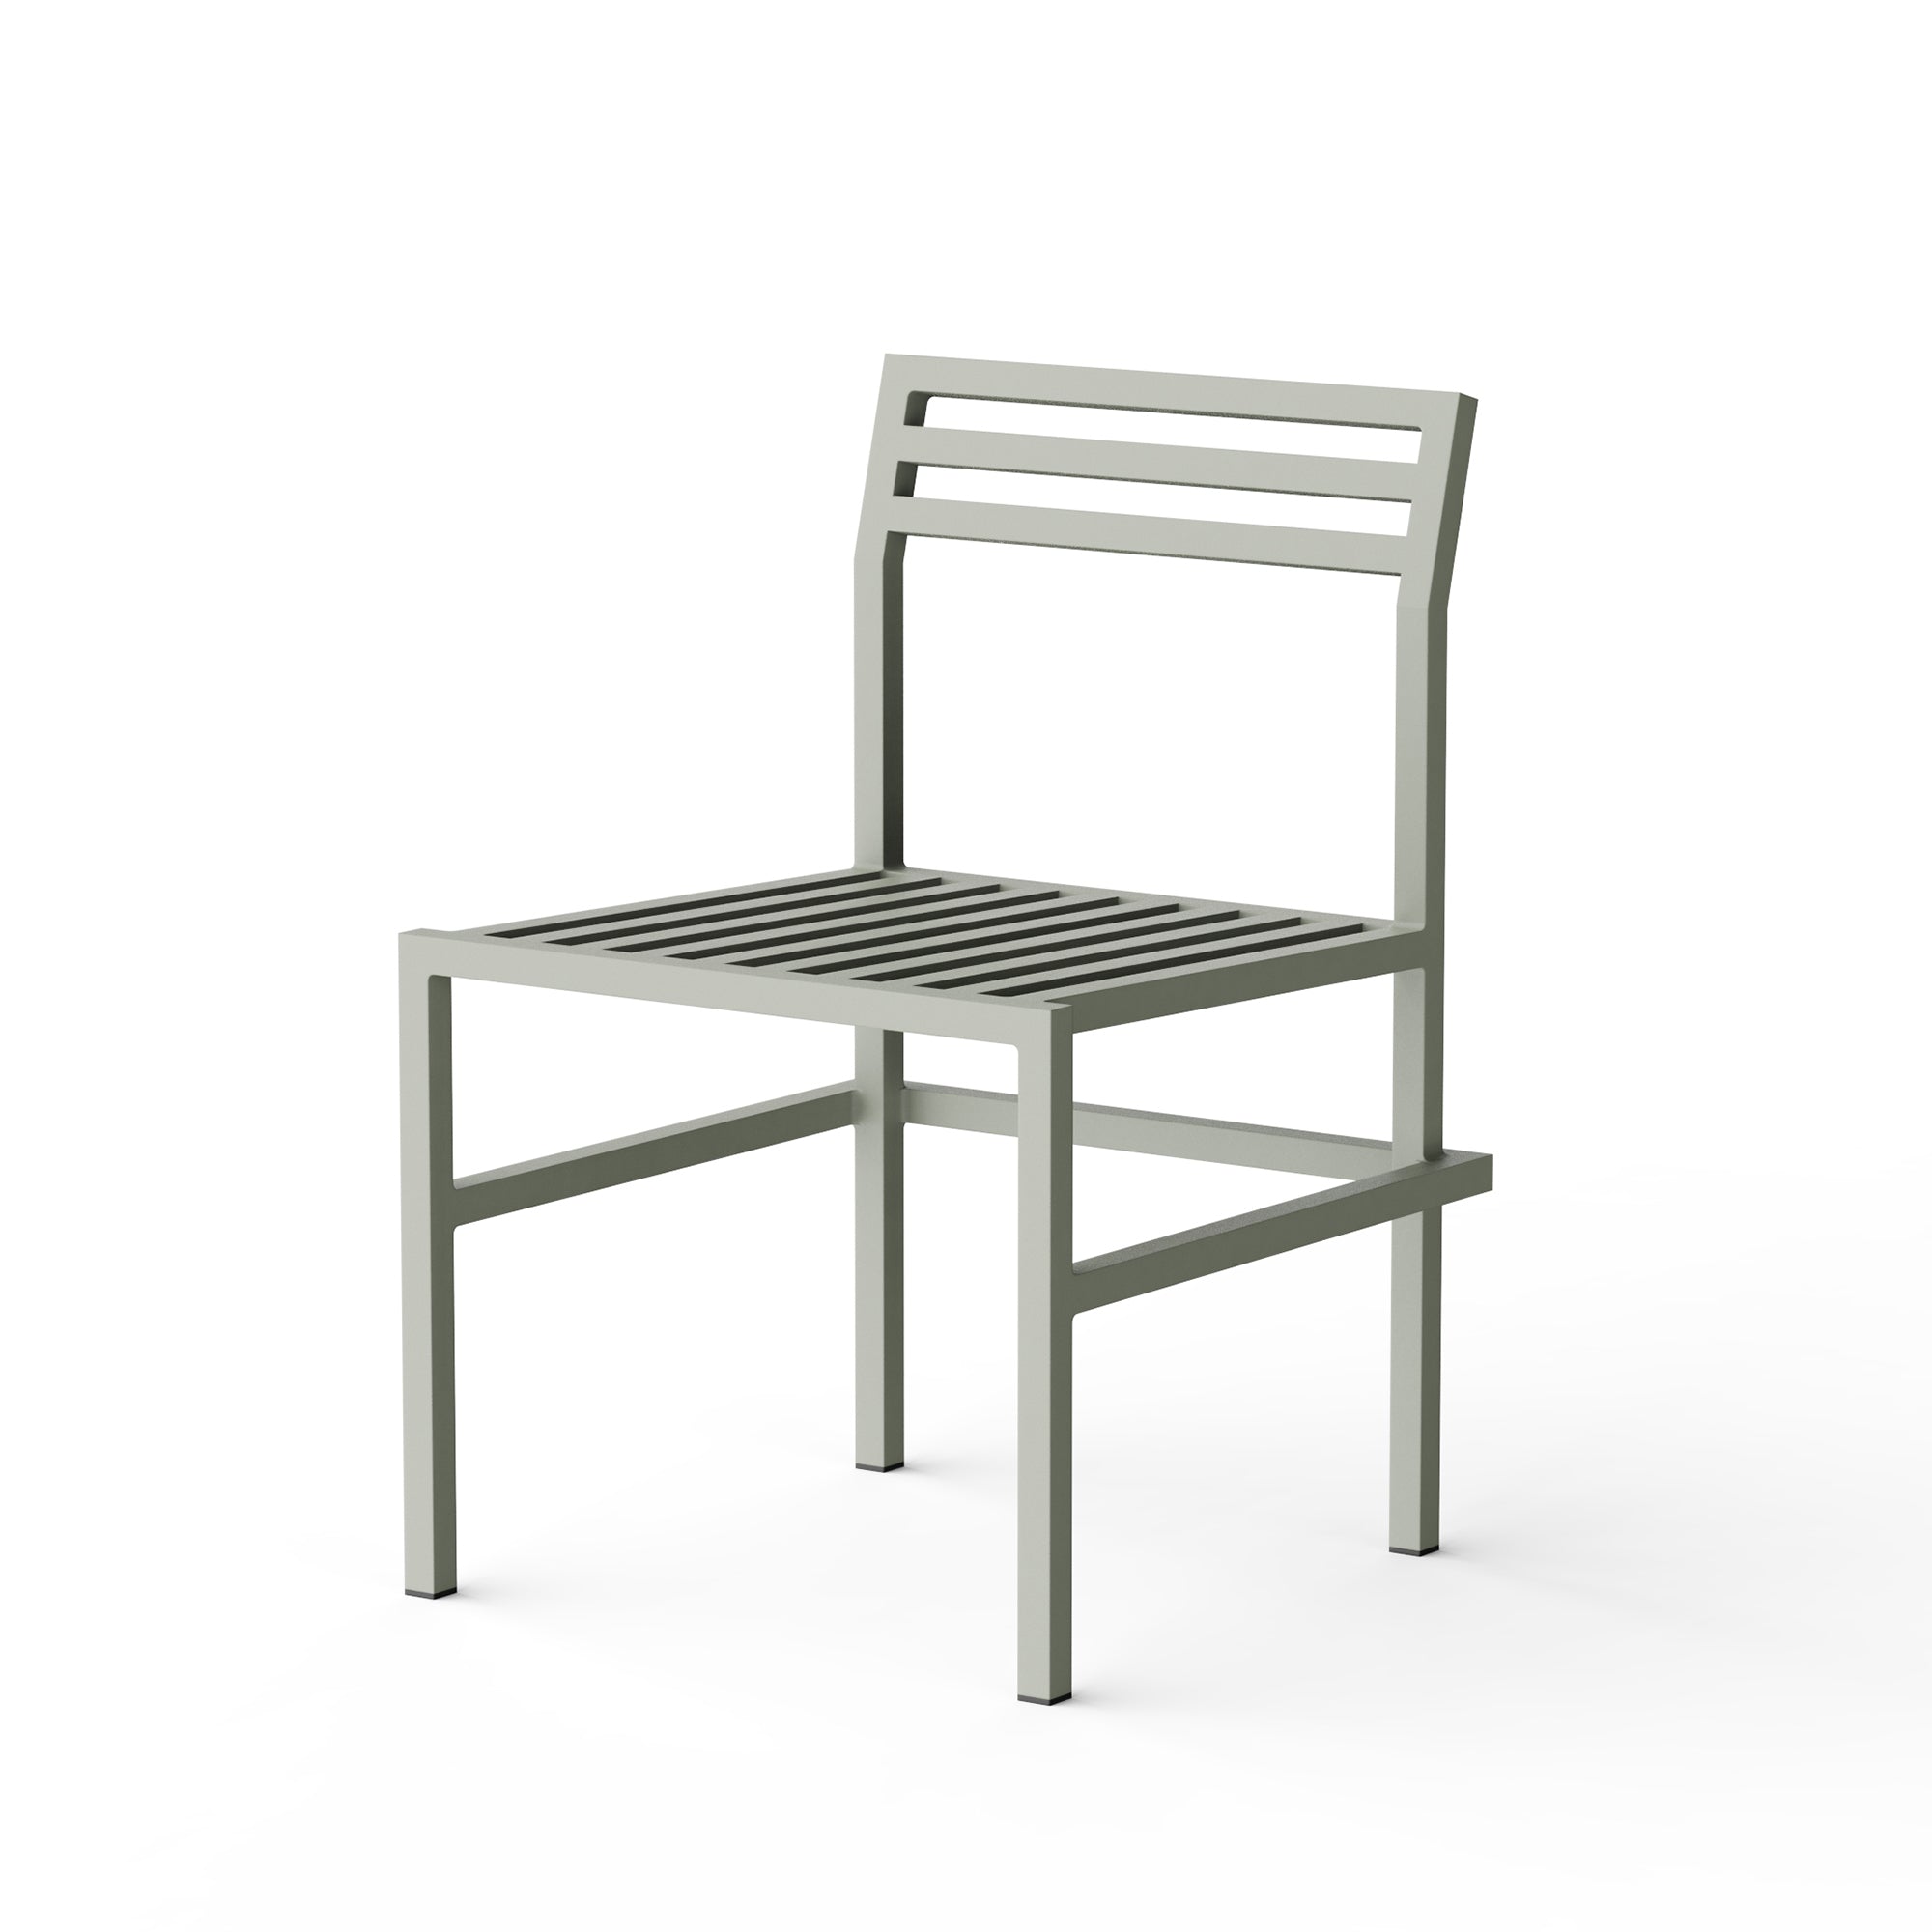 NINE 19 Outdoors Dining Chair